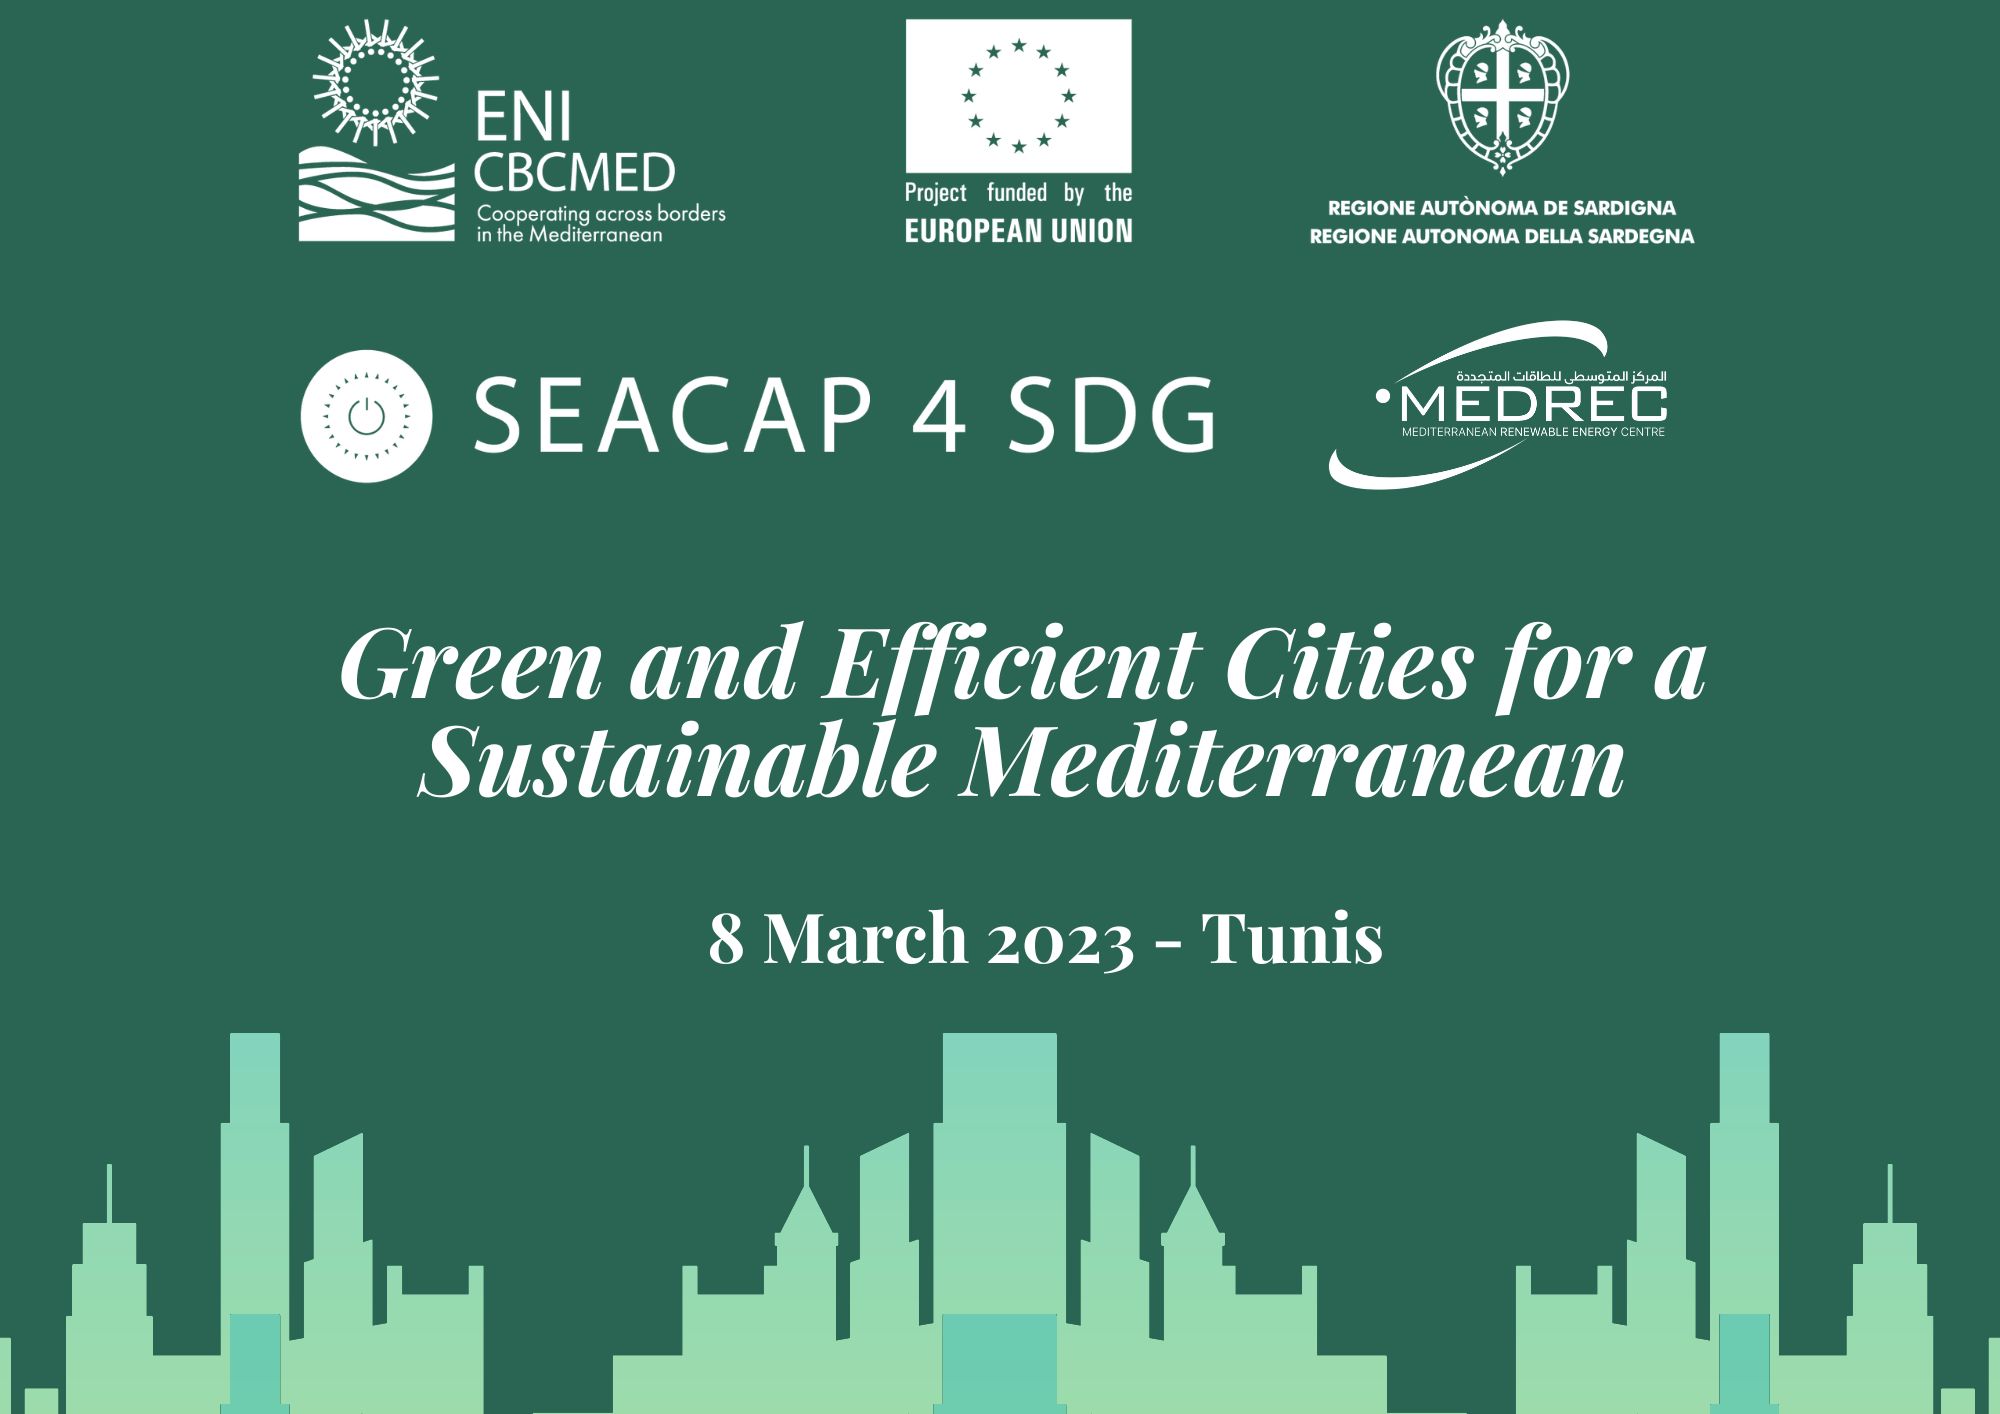 SEACAP4SDG organizes an event on Green and Efficient Cities for a Sustainable Mediterranean in Tunisia